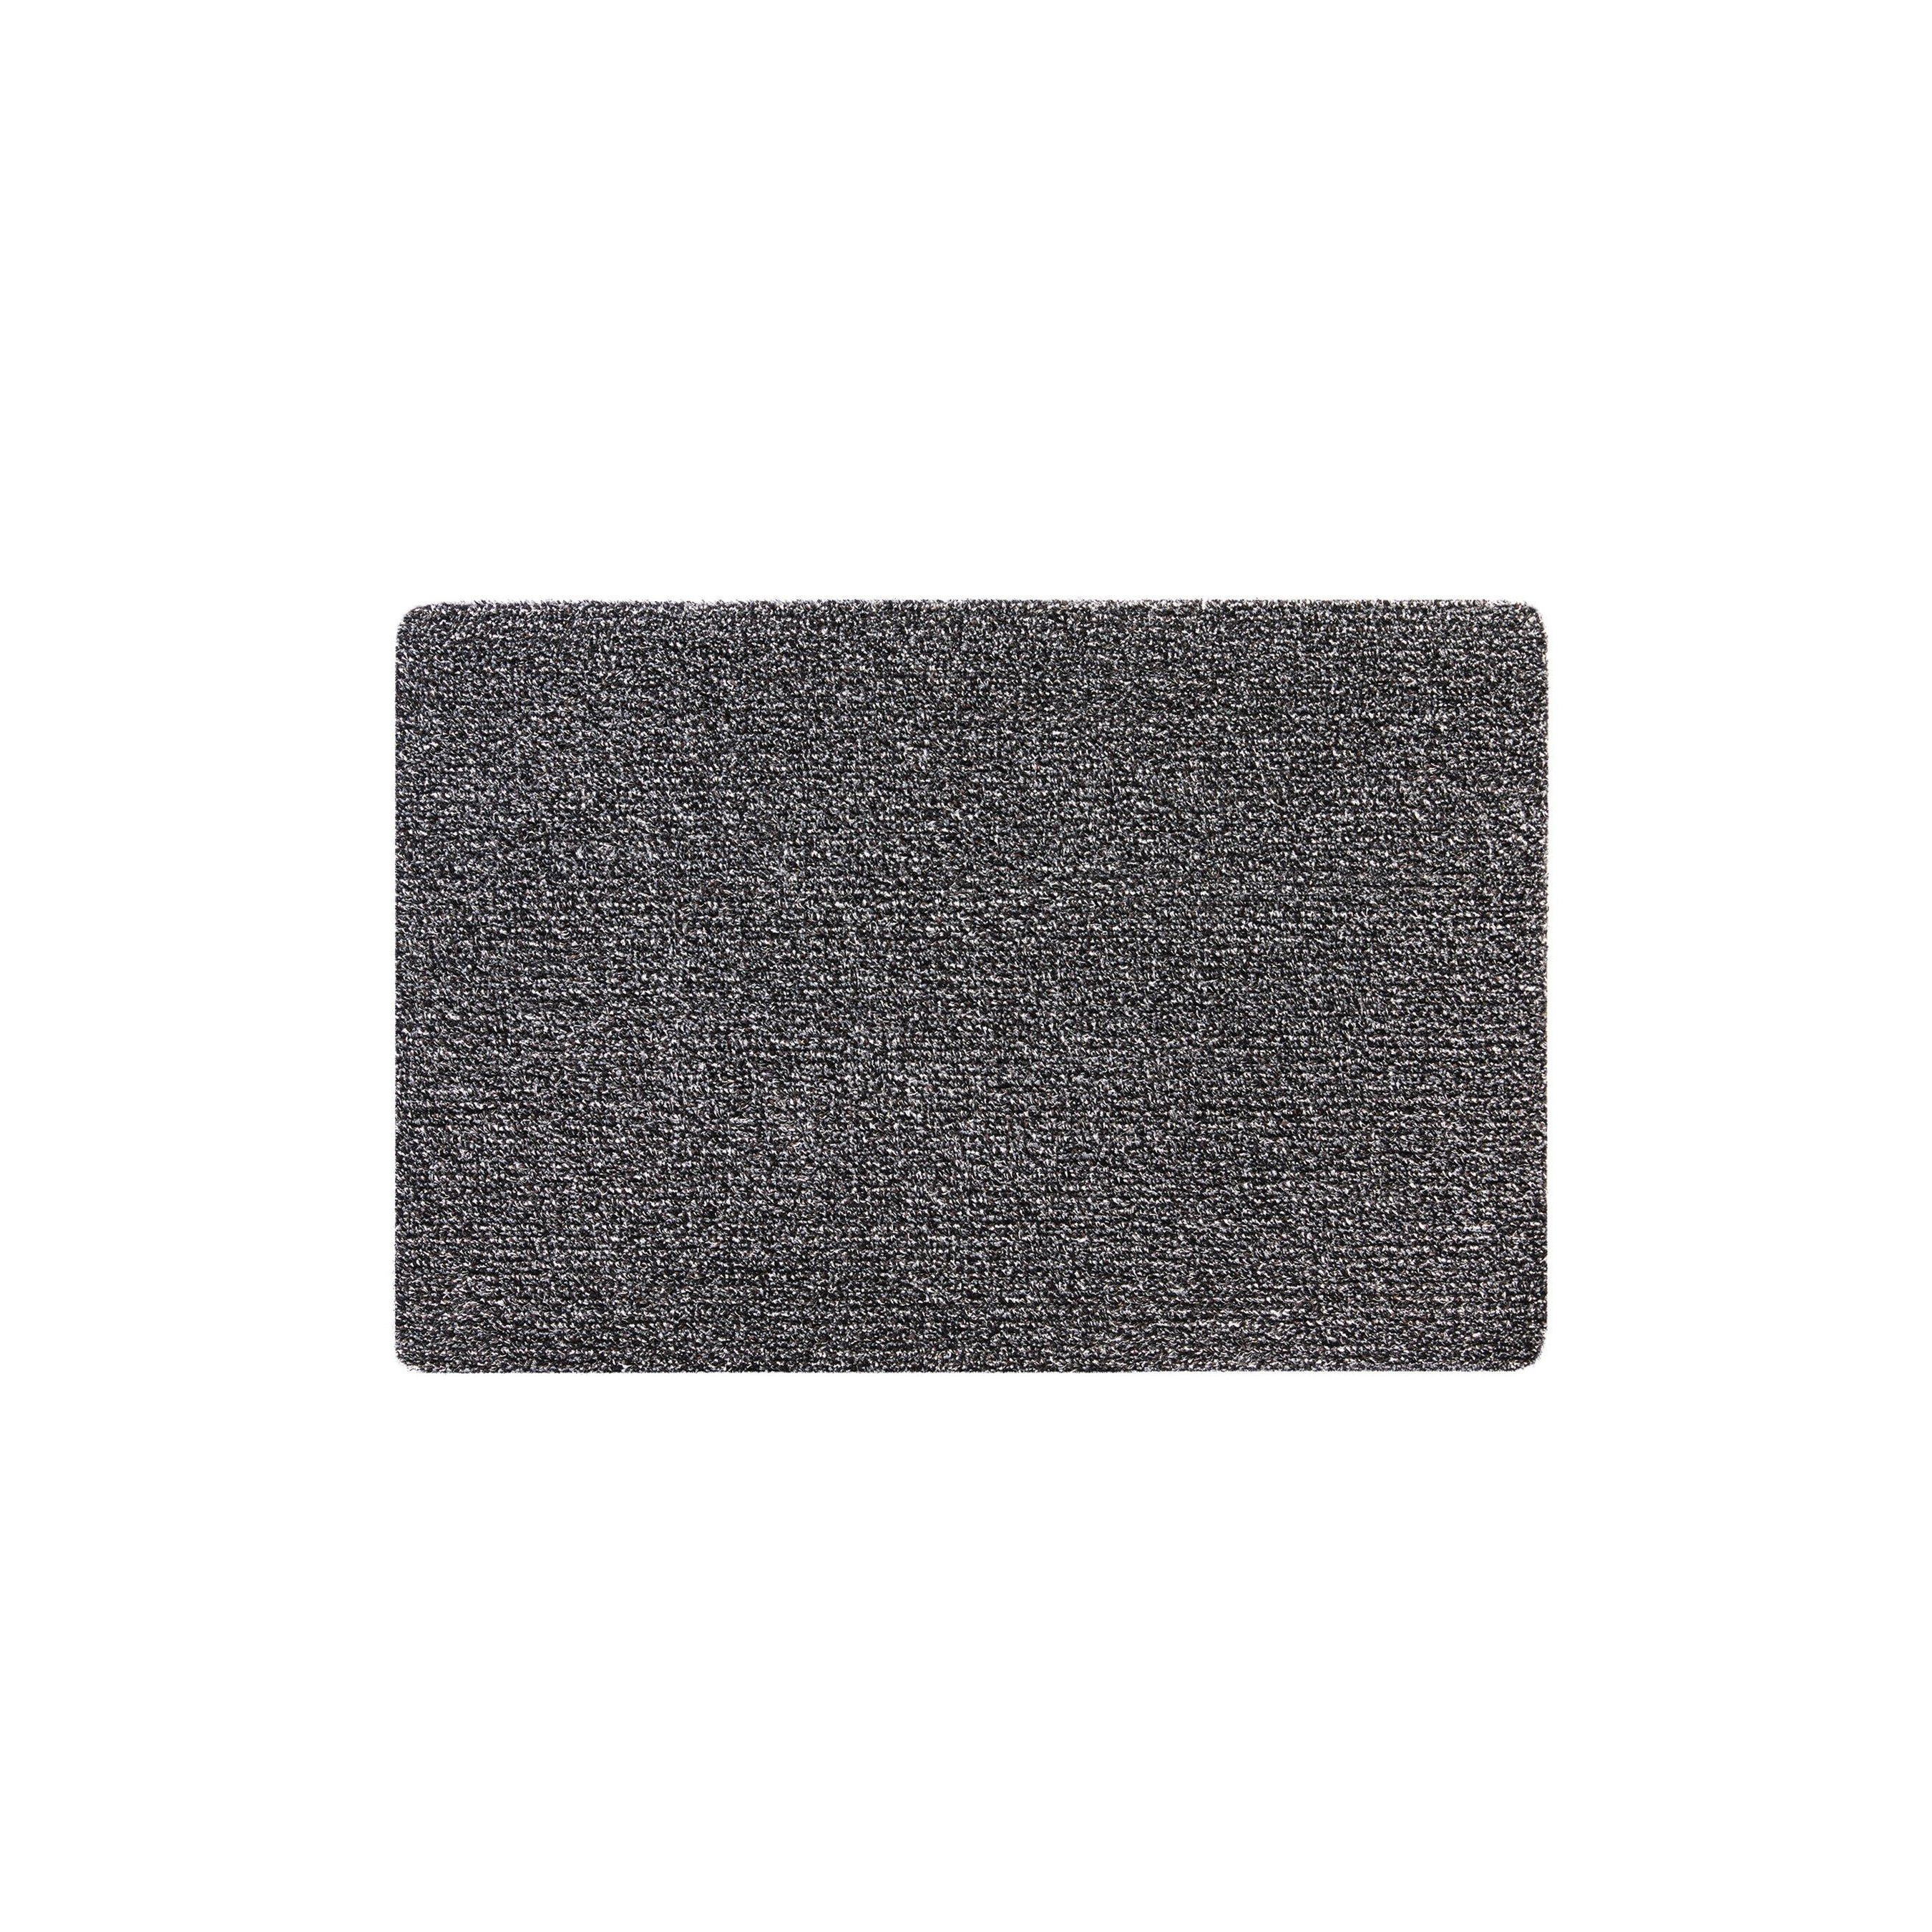 Washable Indoor Cotton Charcoal Mat - image 1